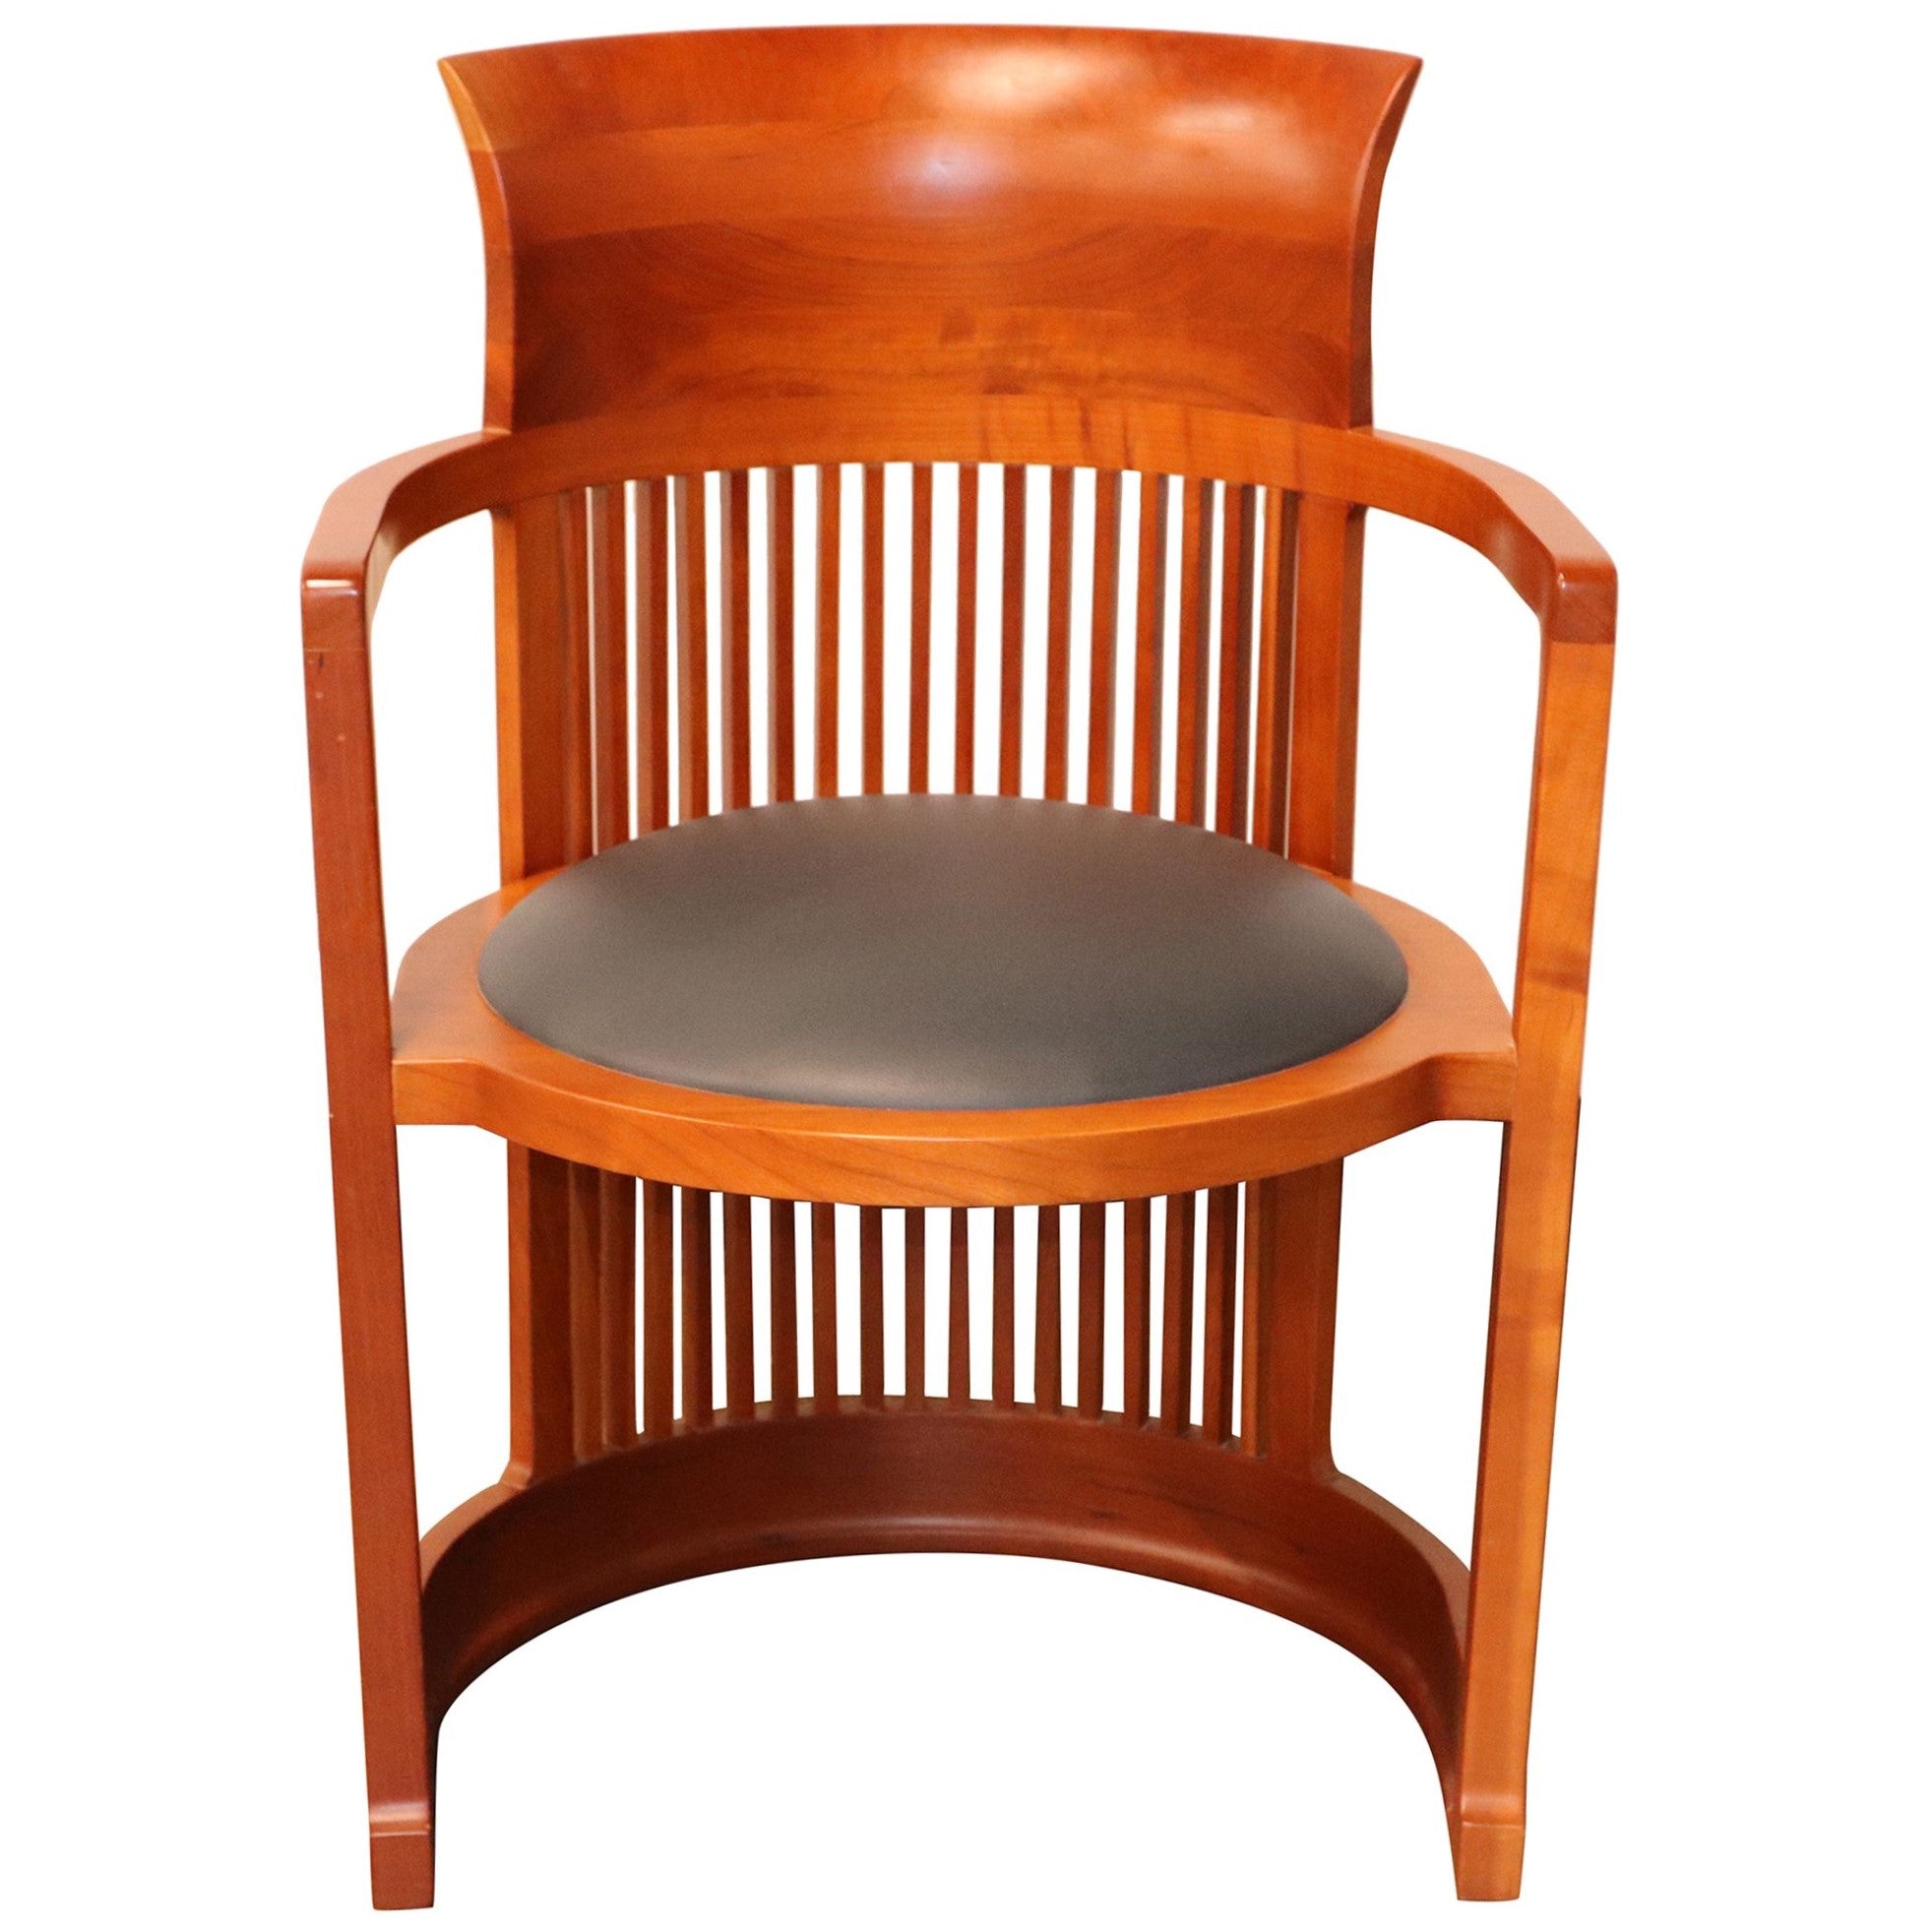 Barrel Chair Set of 4, Cherry -  Preowned